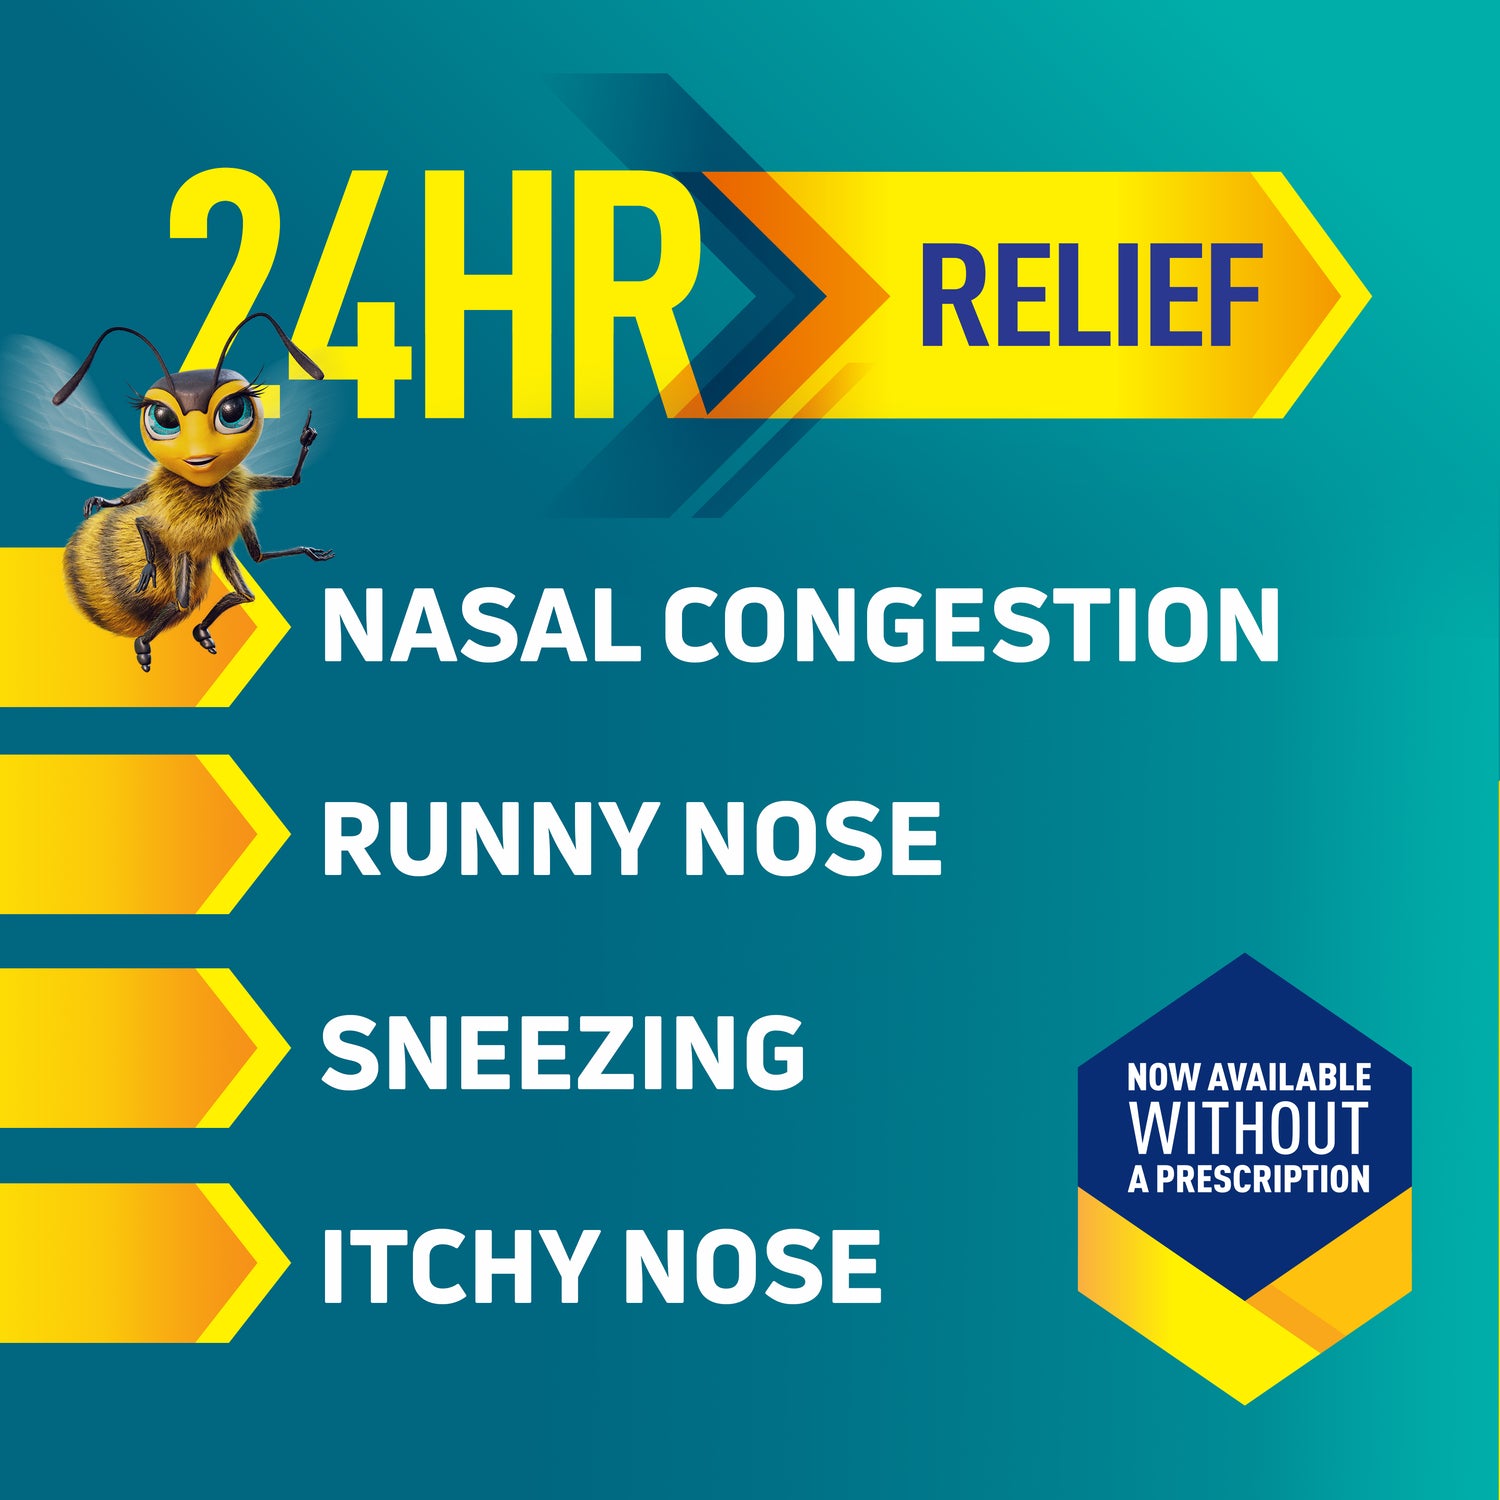 24HR Relief. Now available without a prescription.